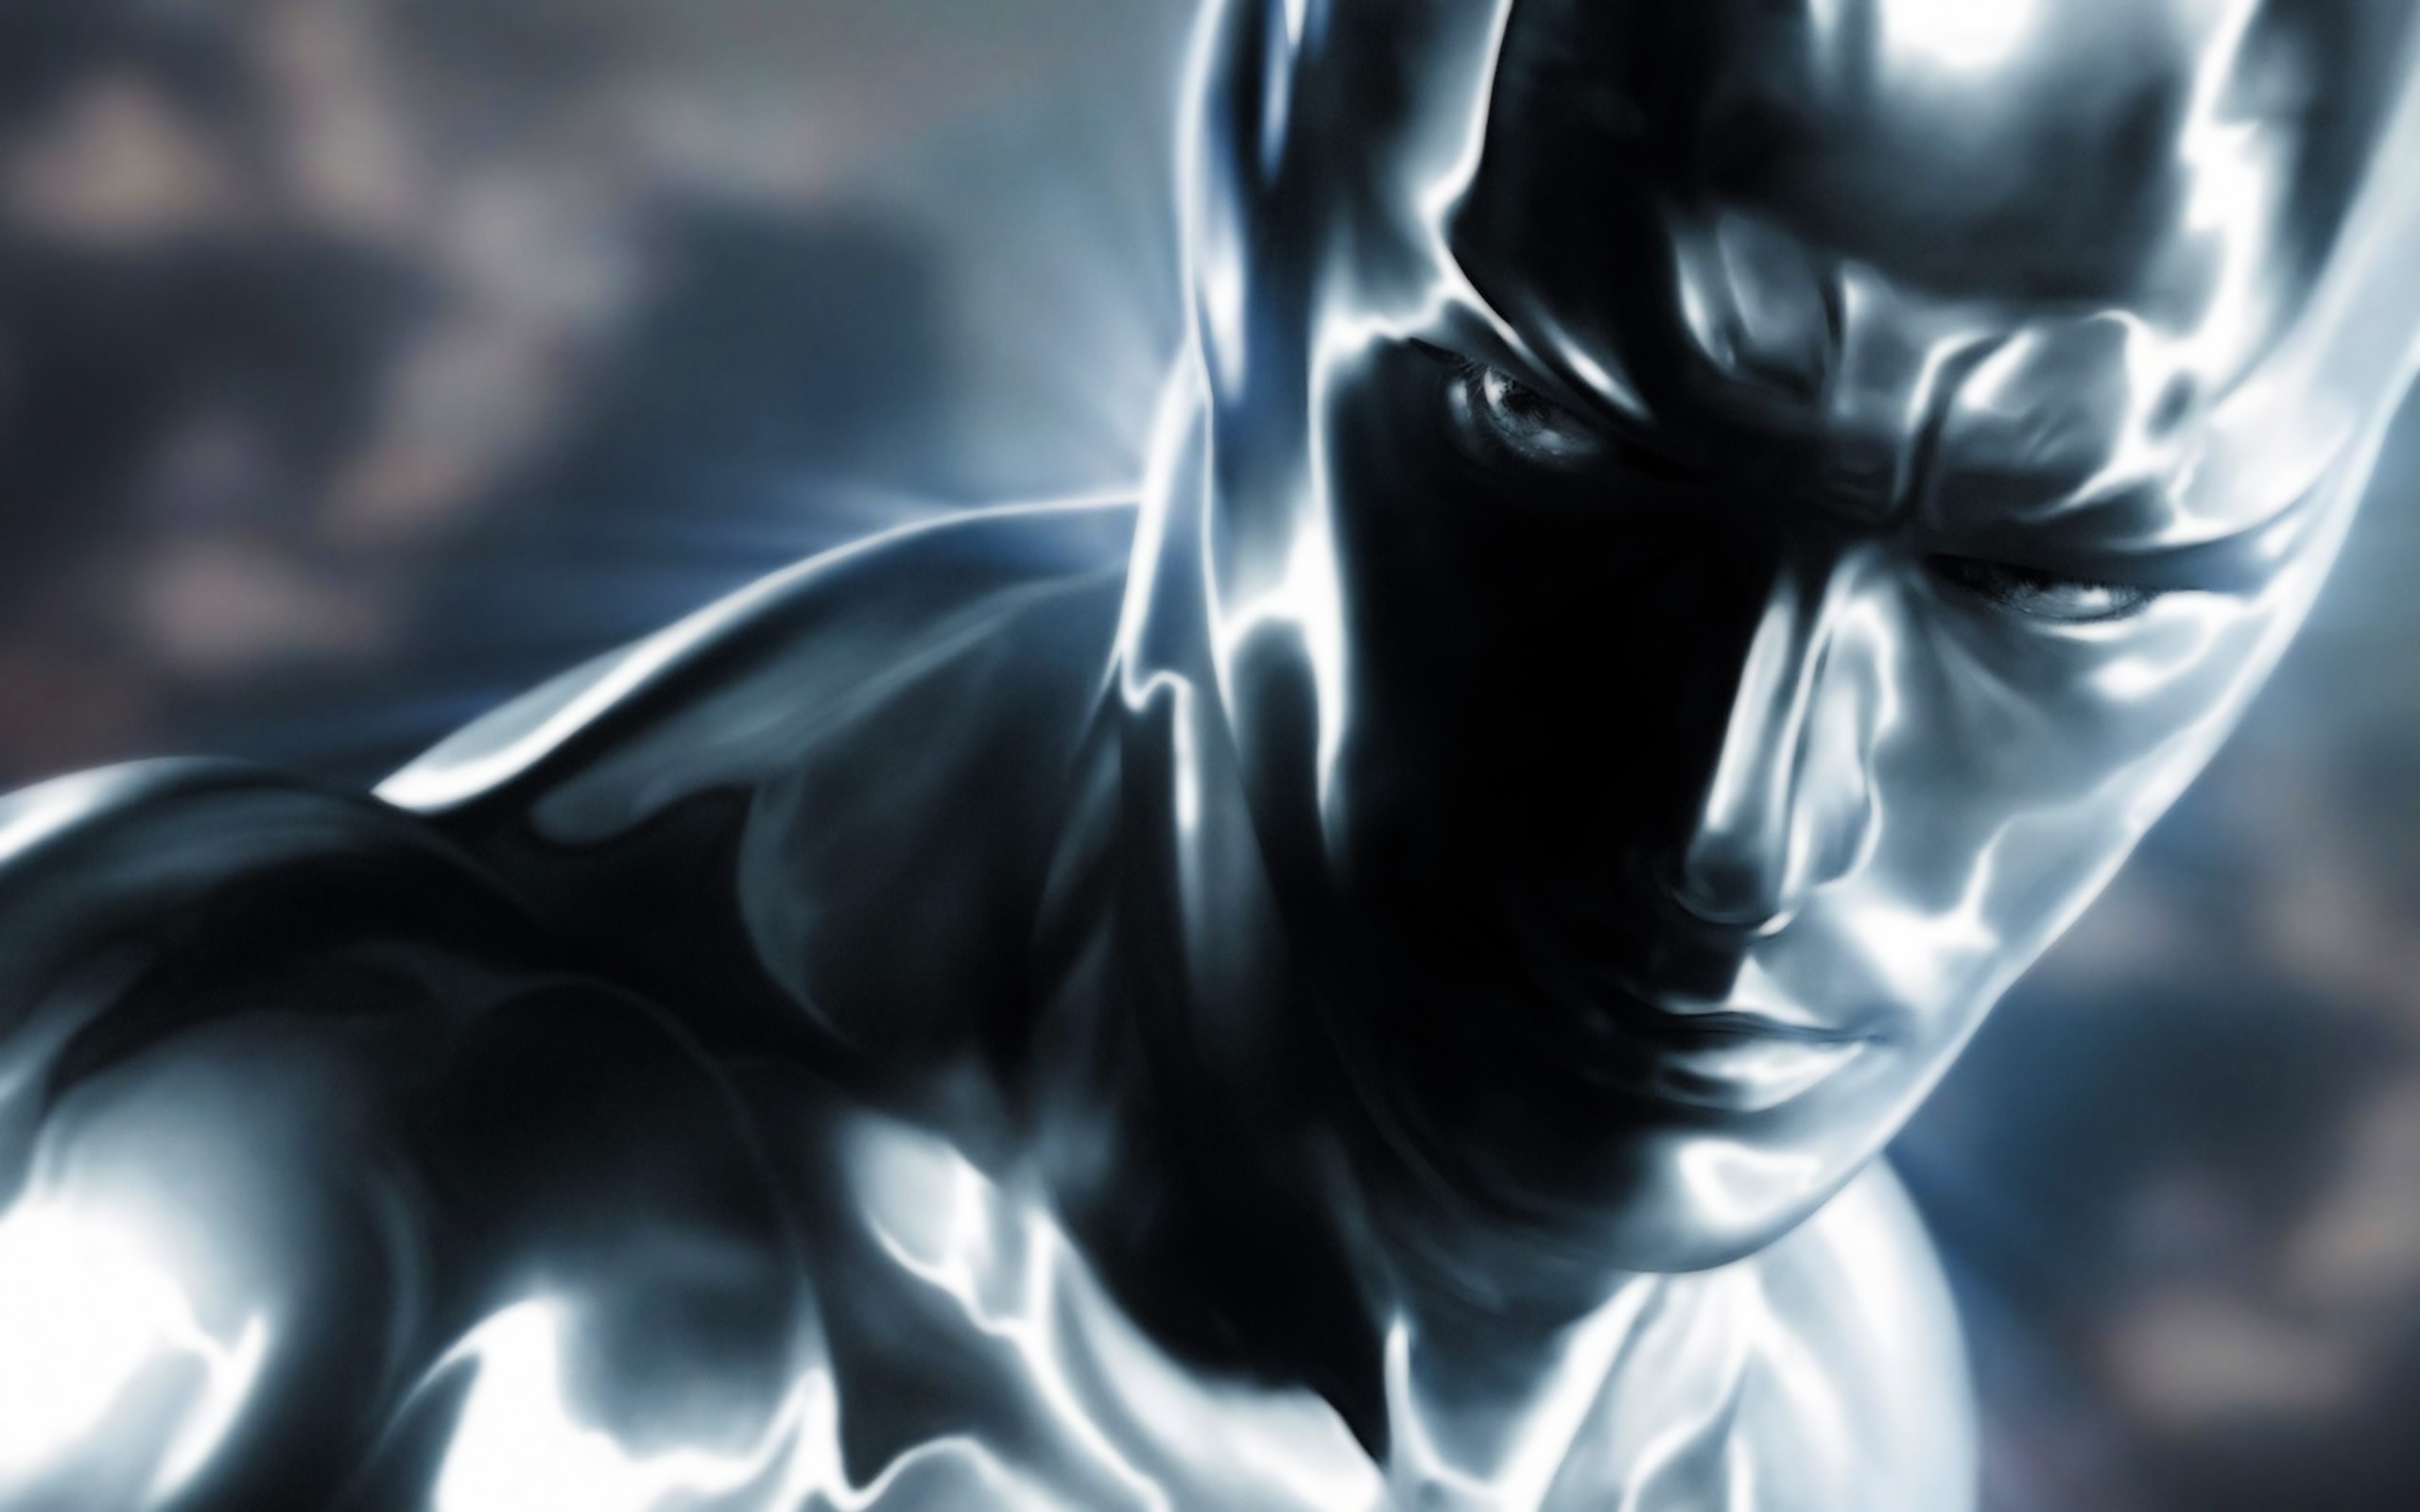 Silver Surfer Movie Posters Wallpaper High Quality